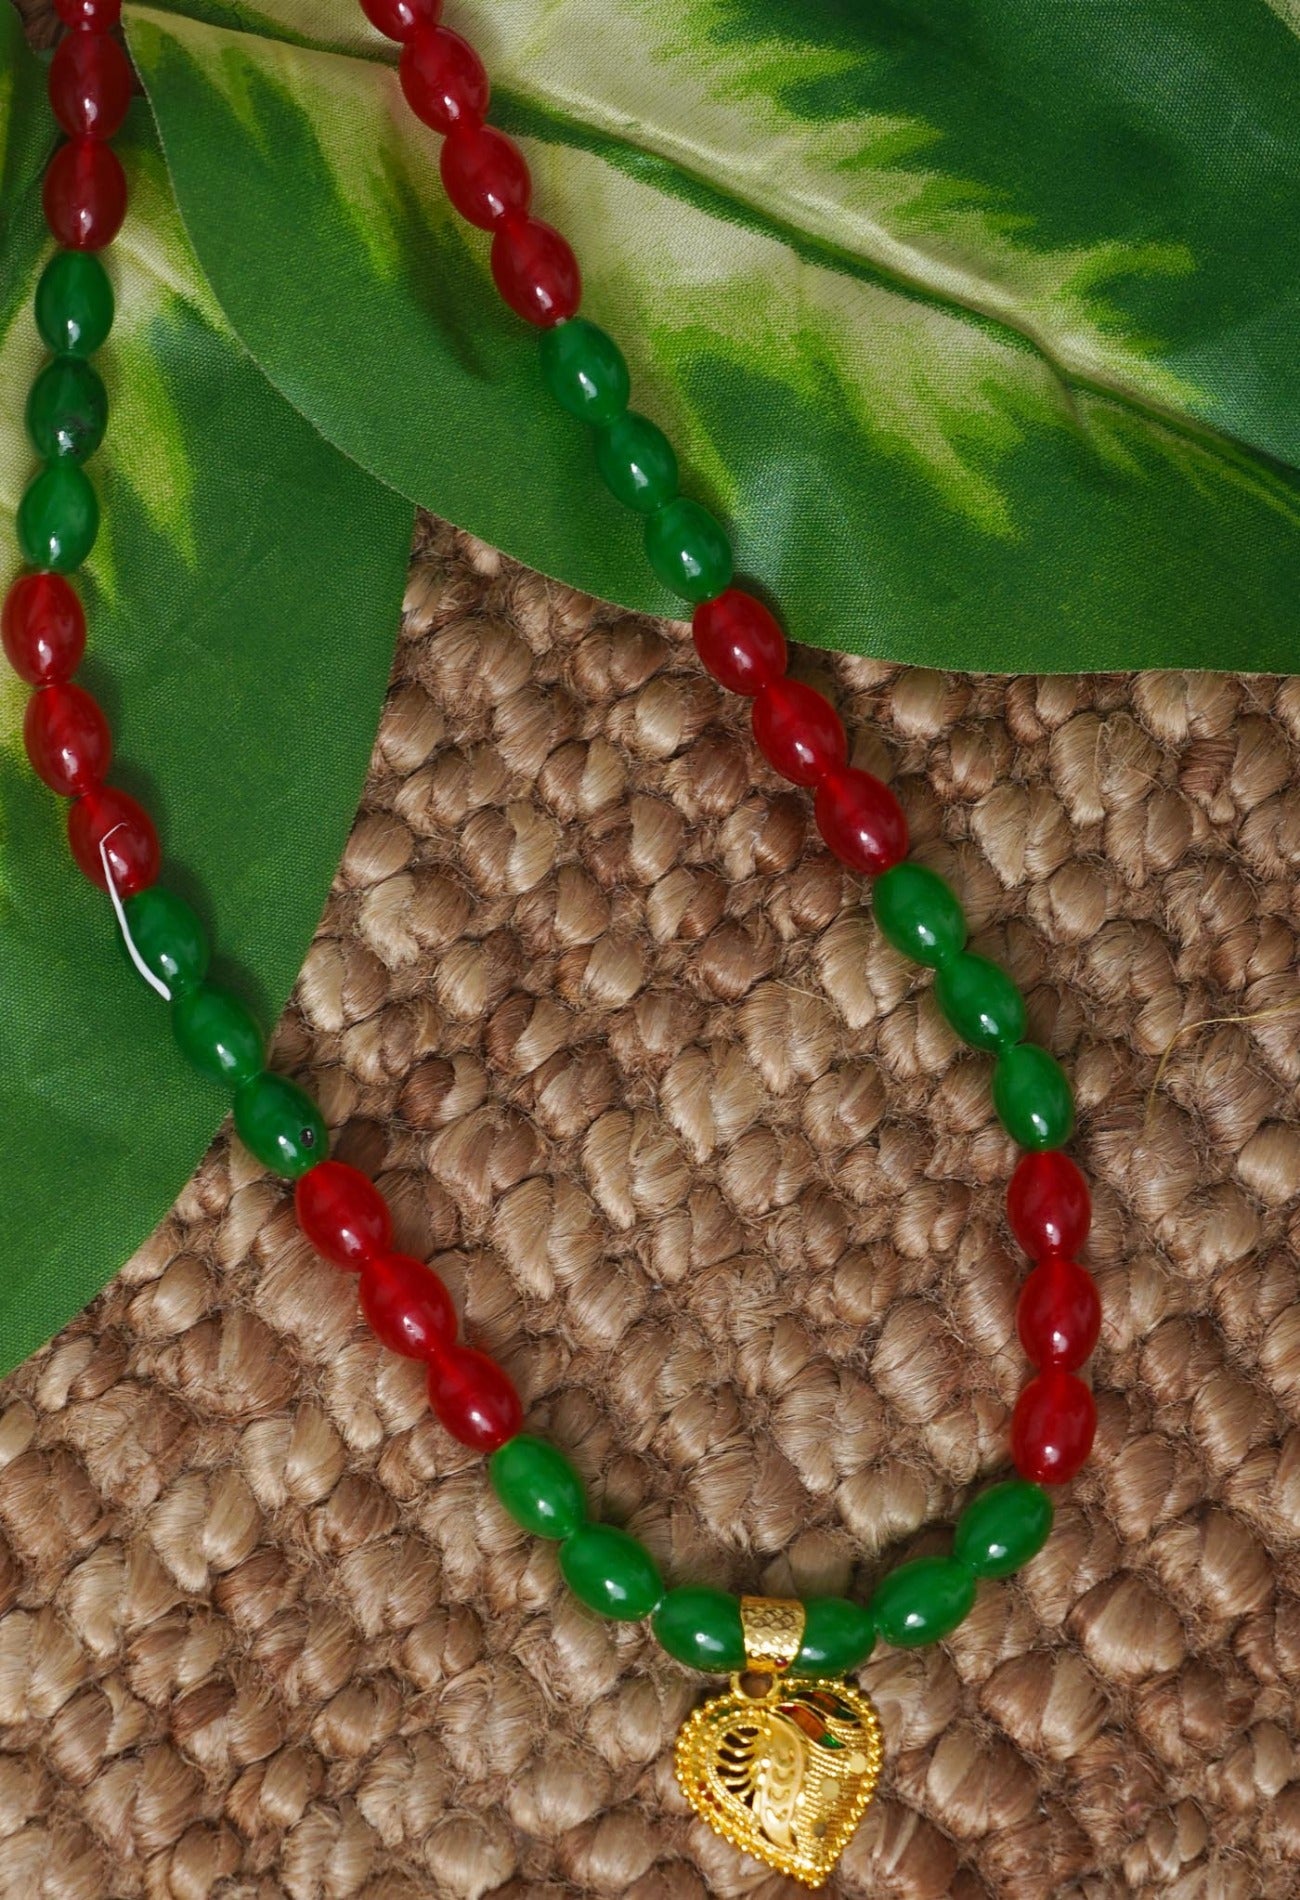 Red and Green Amravati Oval Beads Necklace with Pendent-UJ402